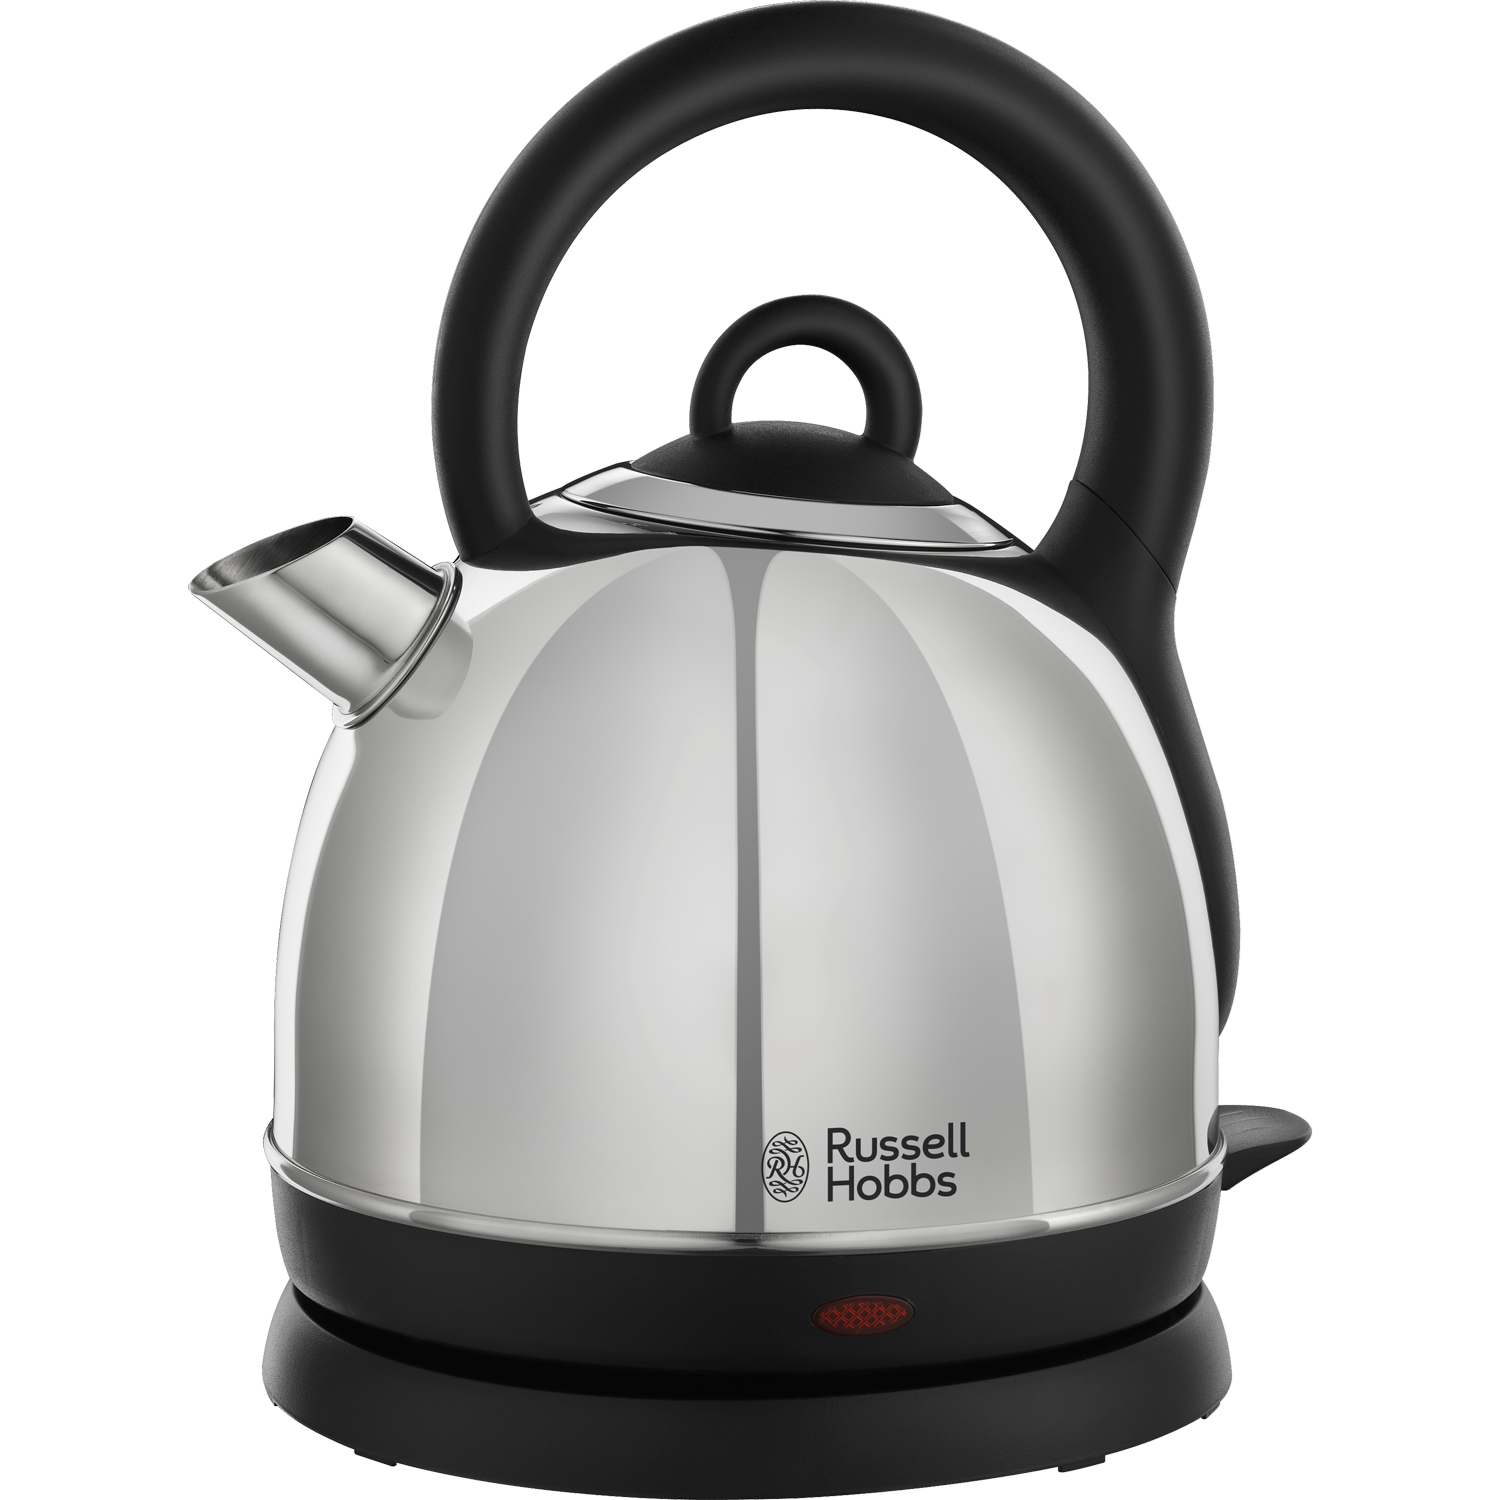 Kettle Png Pic - Kettle, Transparent background PNG HD thumbnail